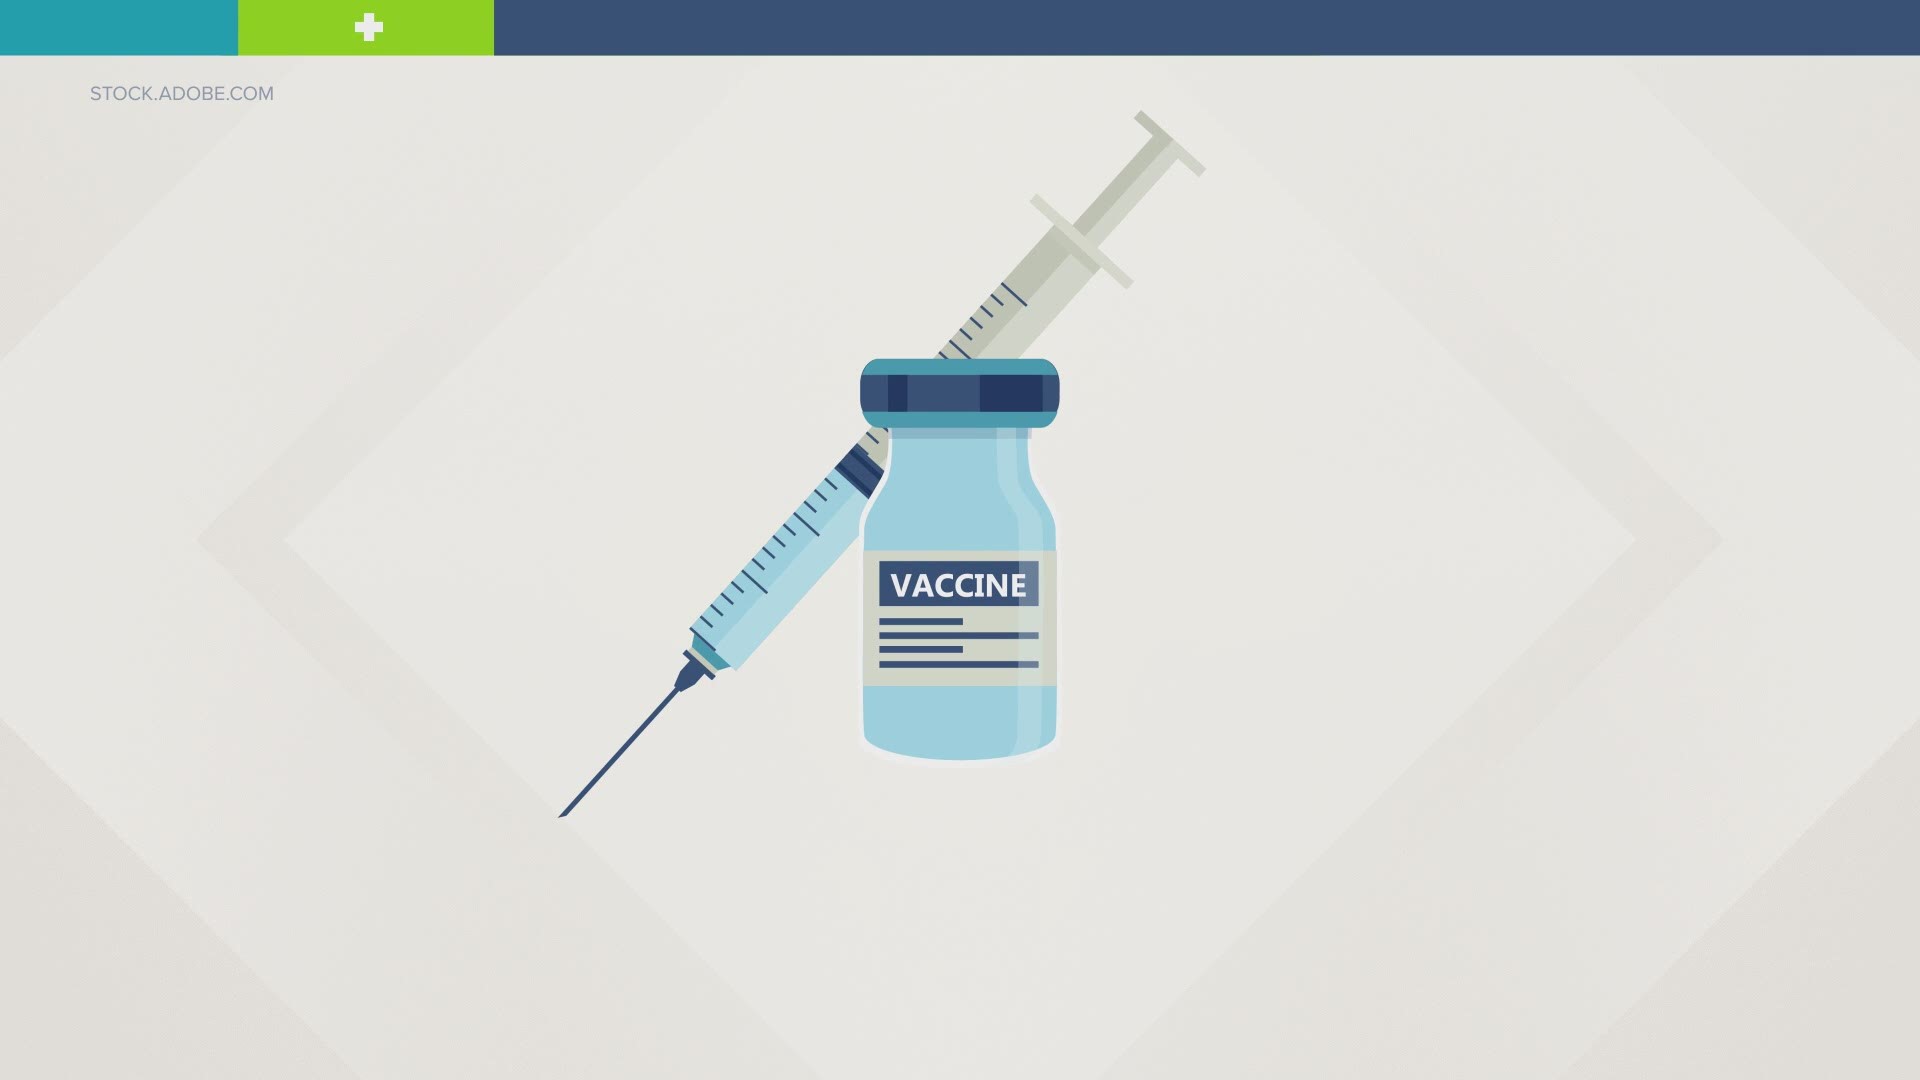 COVID-19 vaccine rollout: What's working and what's not ...